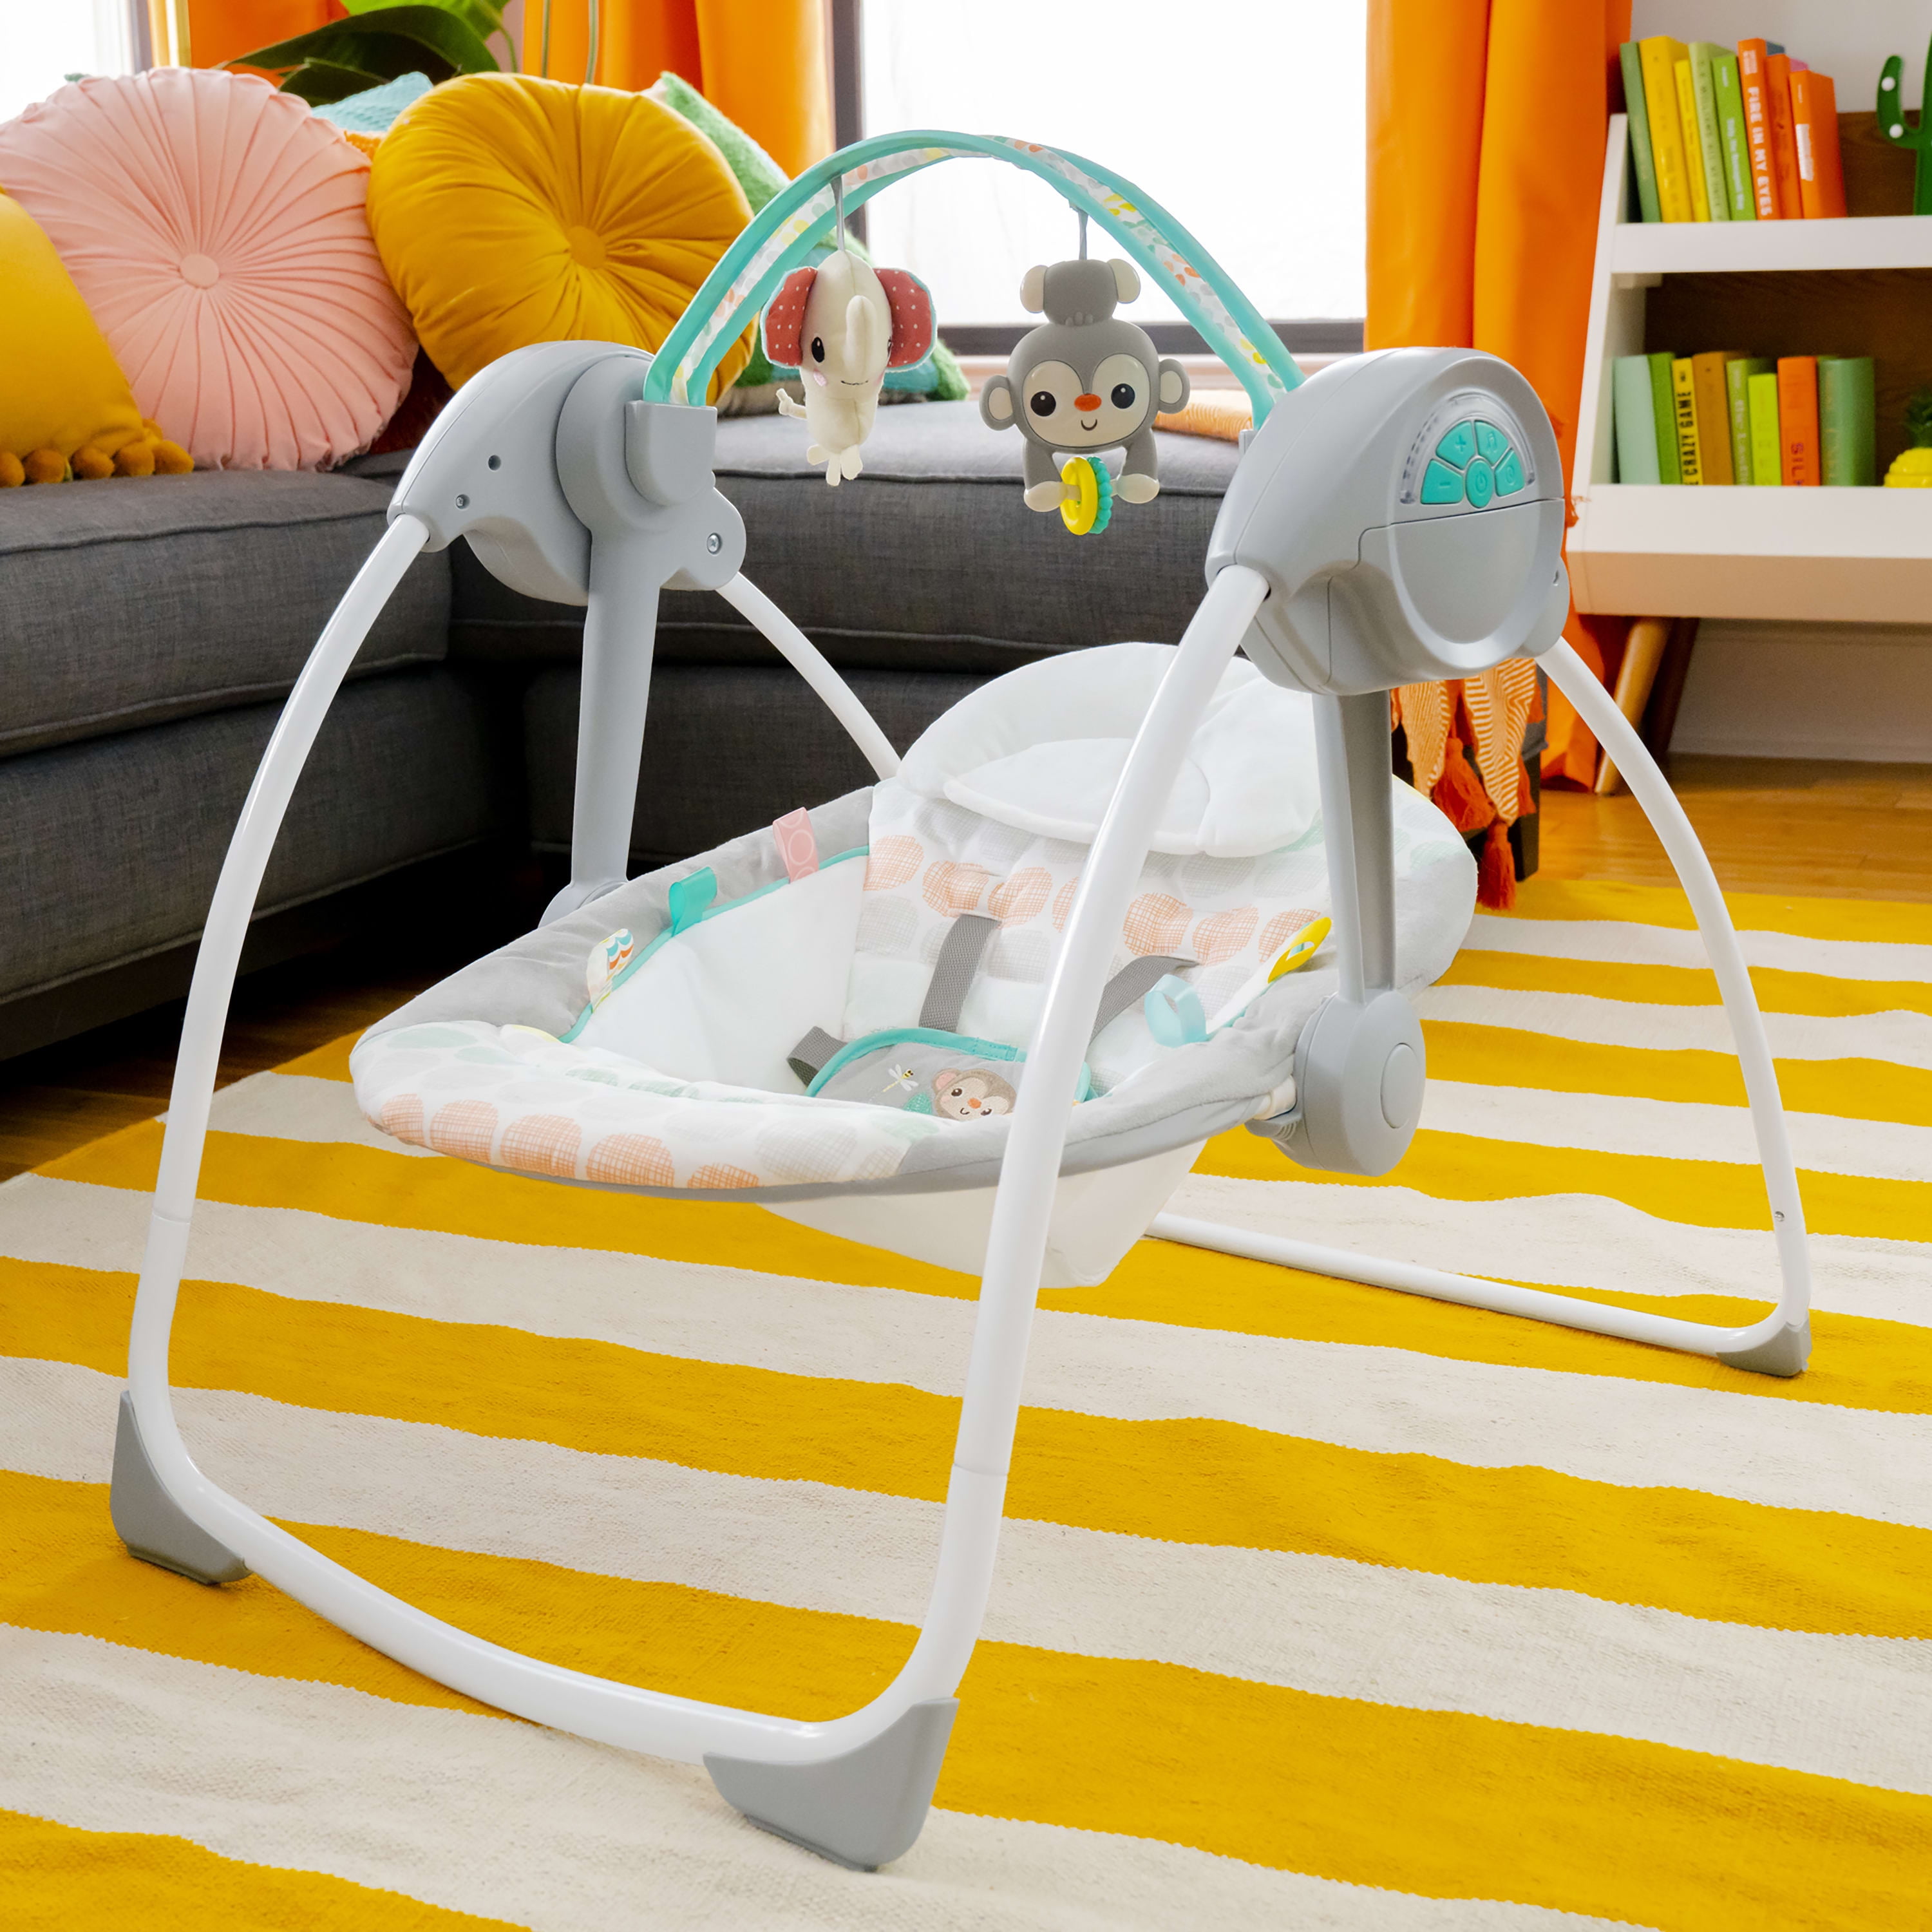 Bright Starts Portable Compact Baby Swing with Newborn and up - Walmart.com